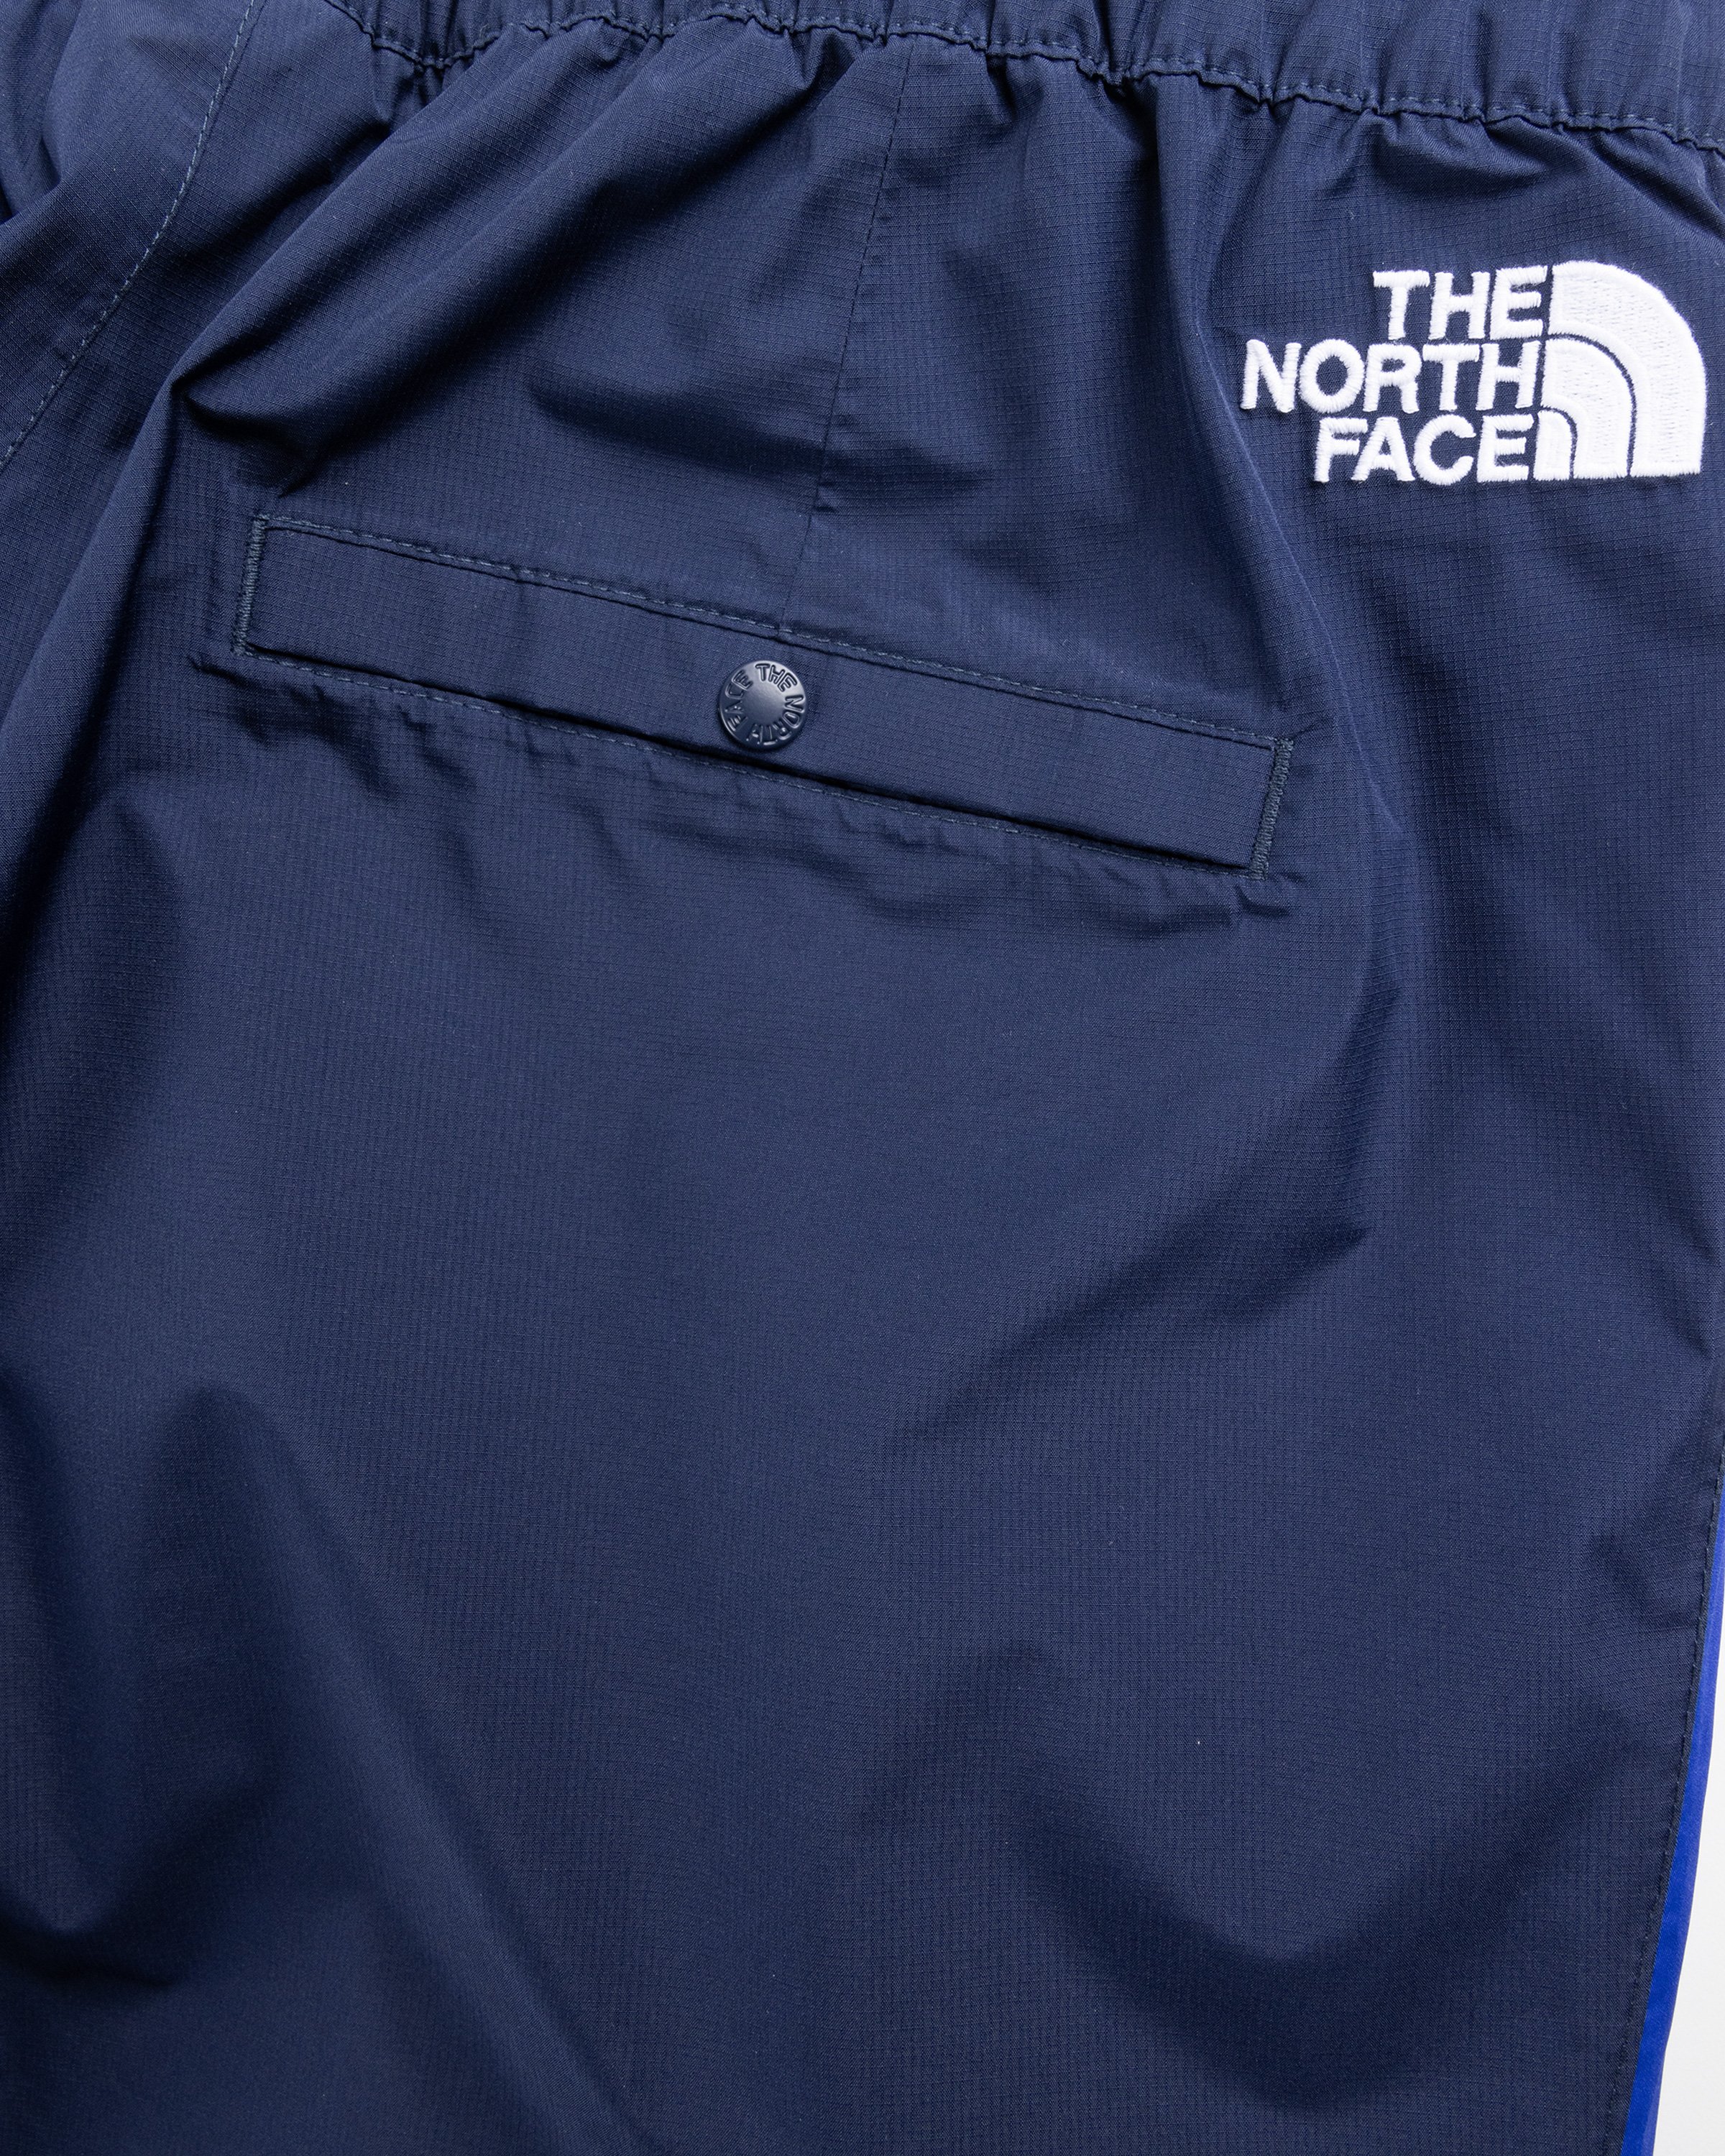 The North Face - M GTX CASUAL PANTS - AP SUMMIT NAVY/TNF BLUE - Clothing - Blue - Image 7